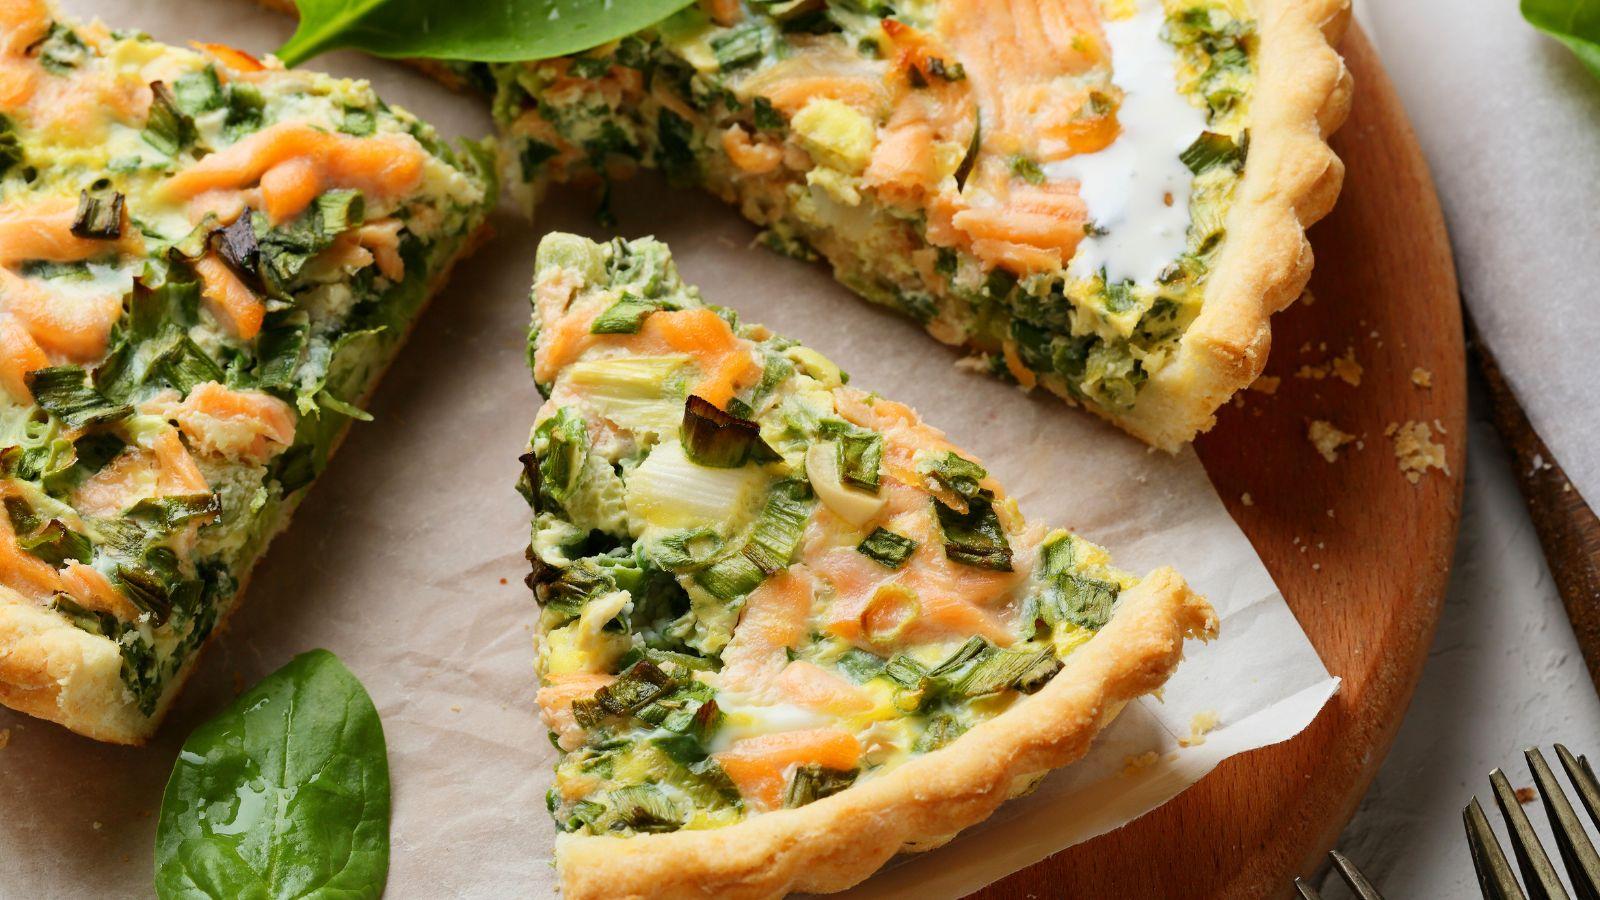 A quiche with leafy greens and tomatoes cut into three pieces.